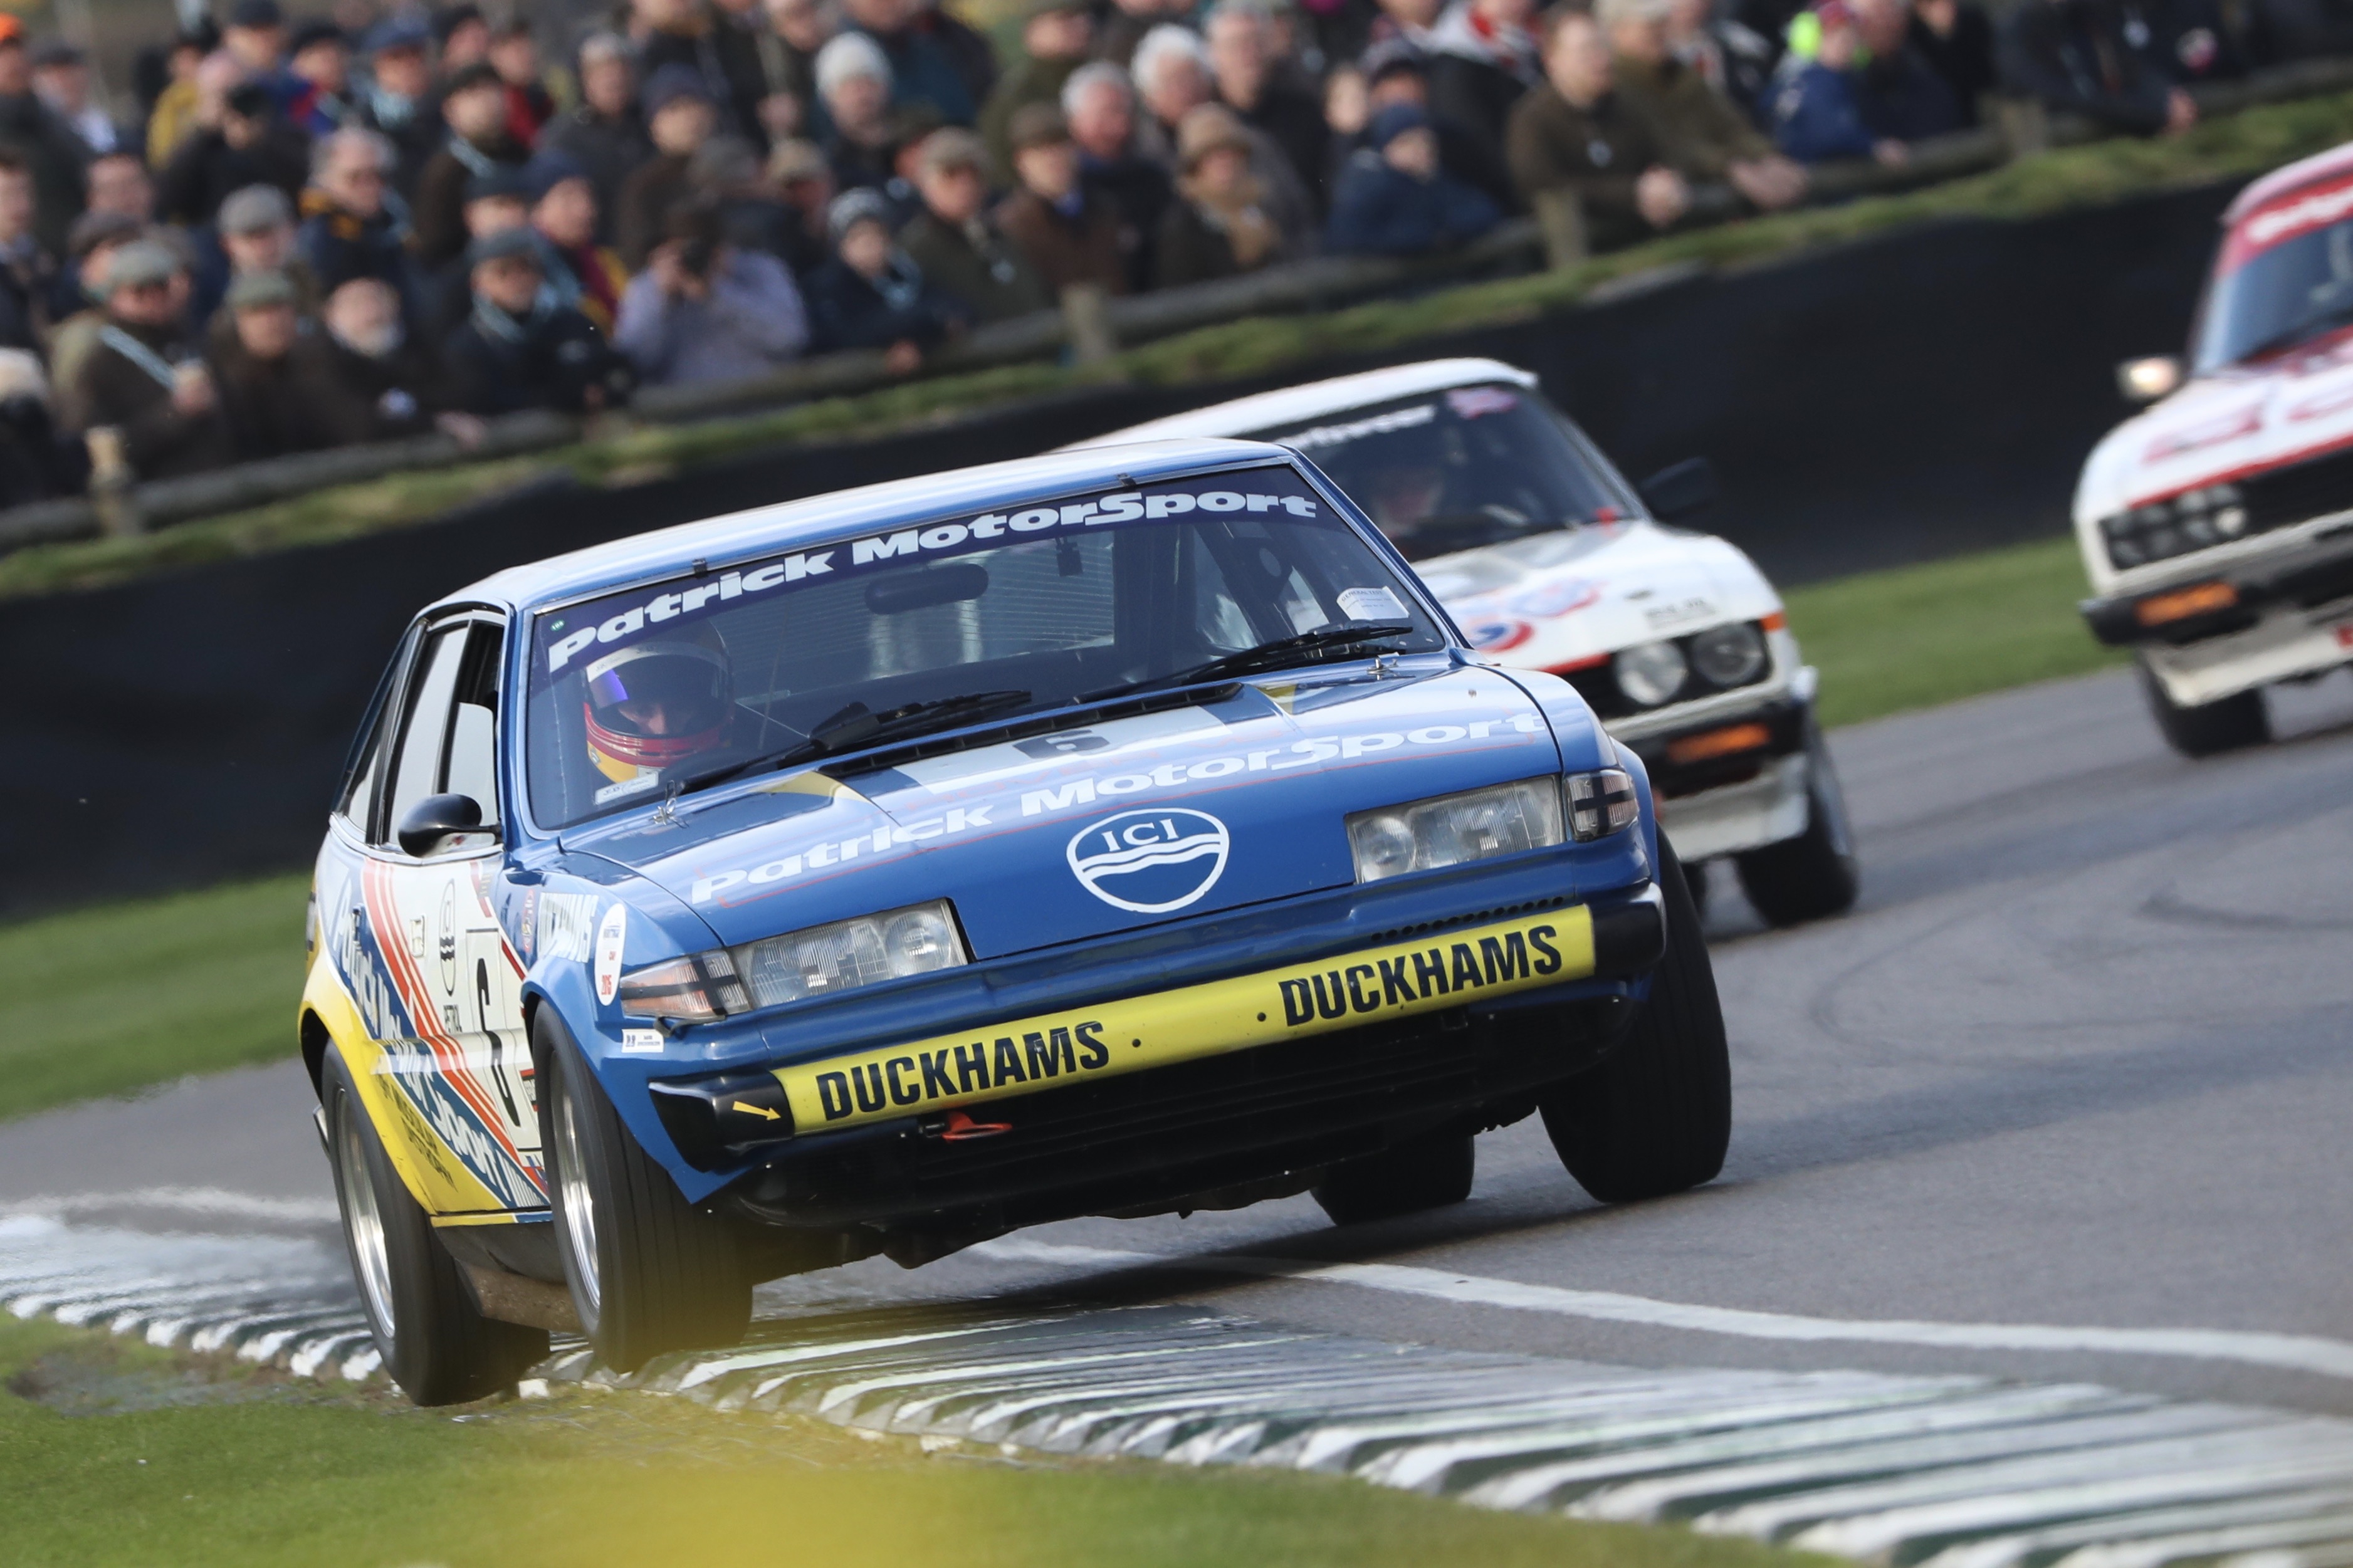 A dominant second race for the Rover SD1 awarded JD Classics a double victory in the weekend's Gerry Marshall Trophy.